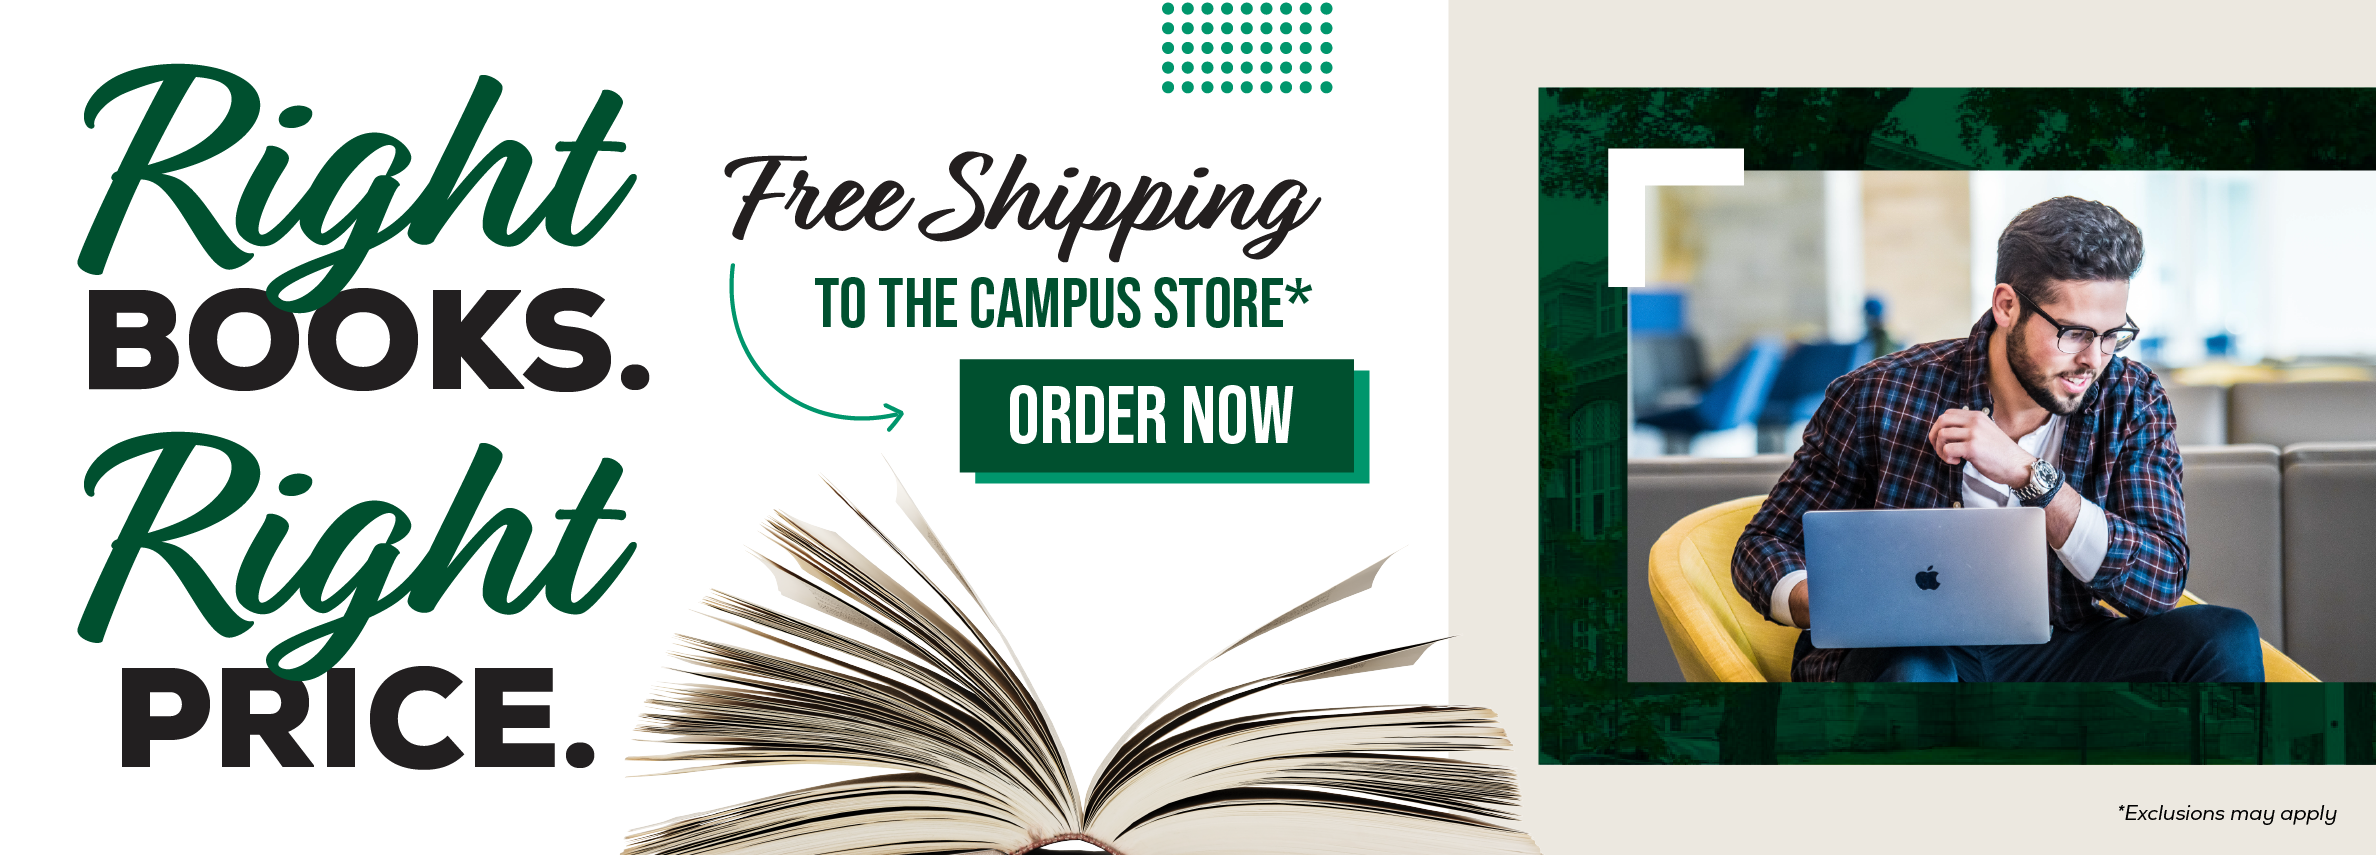 Right books. Right price. Free shipping to the campus store.* Order now. *Exclusions may apply.